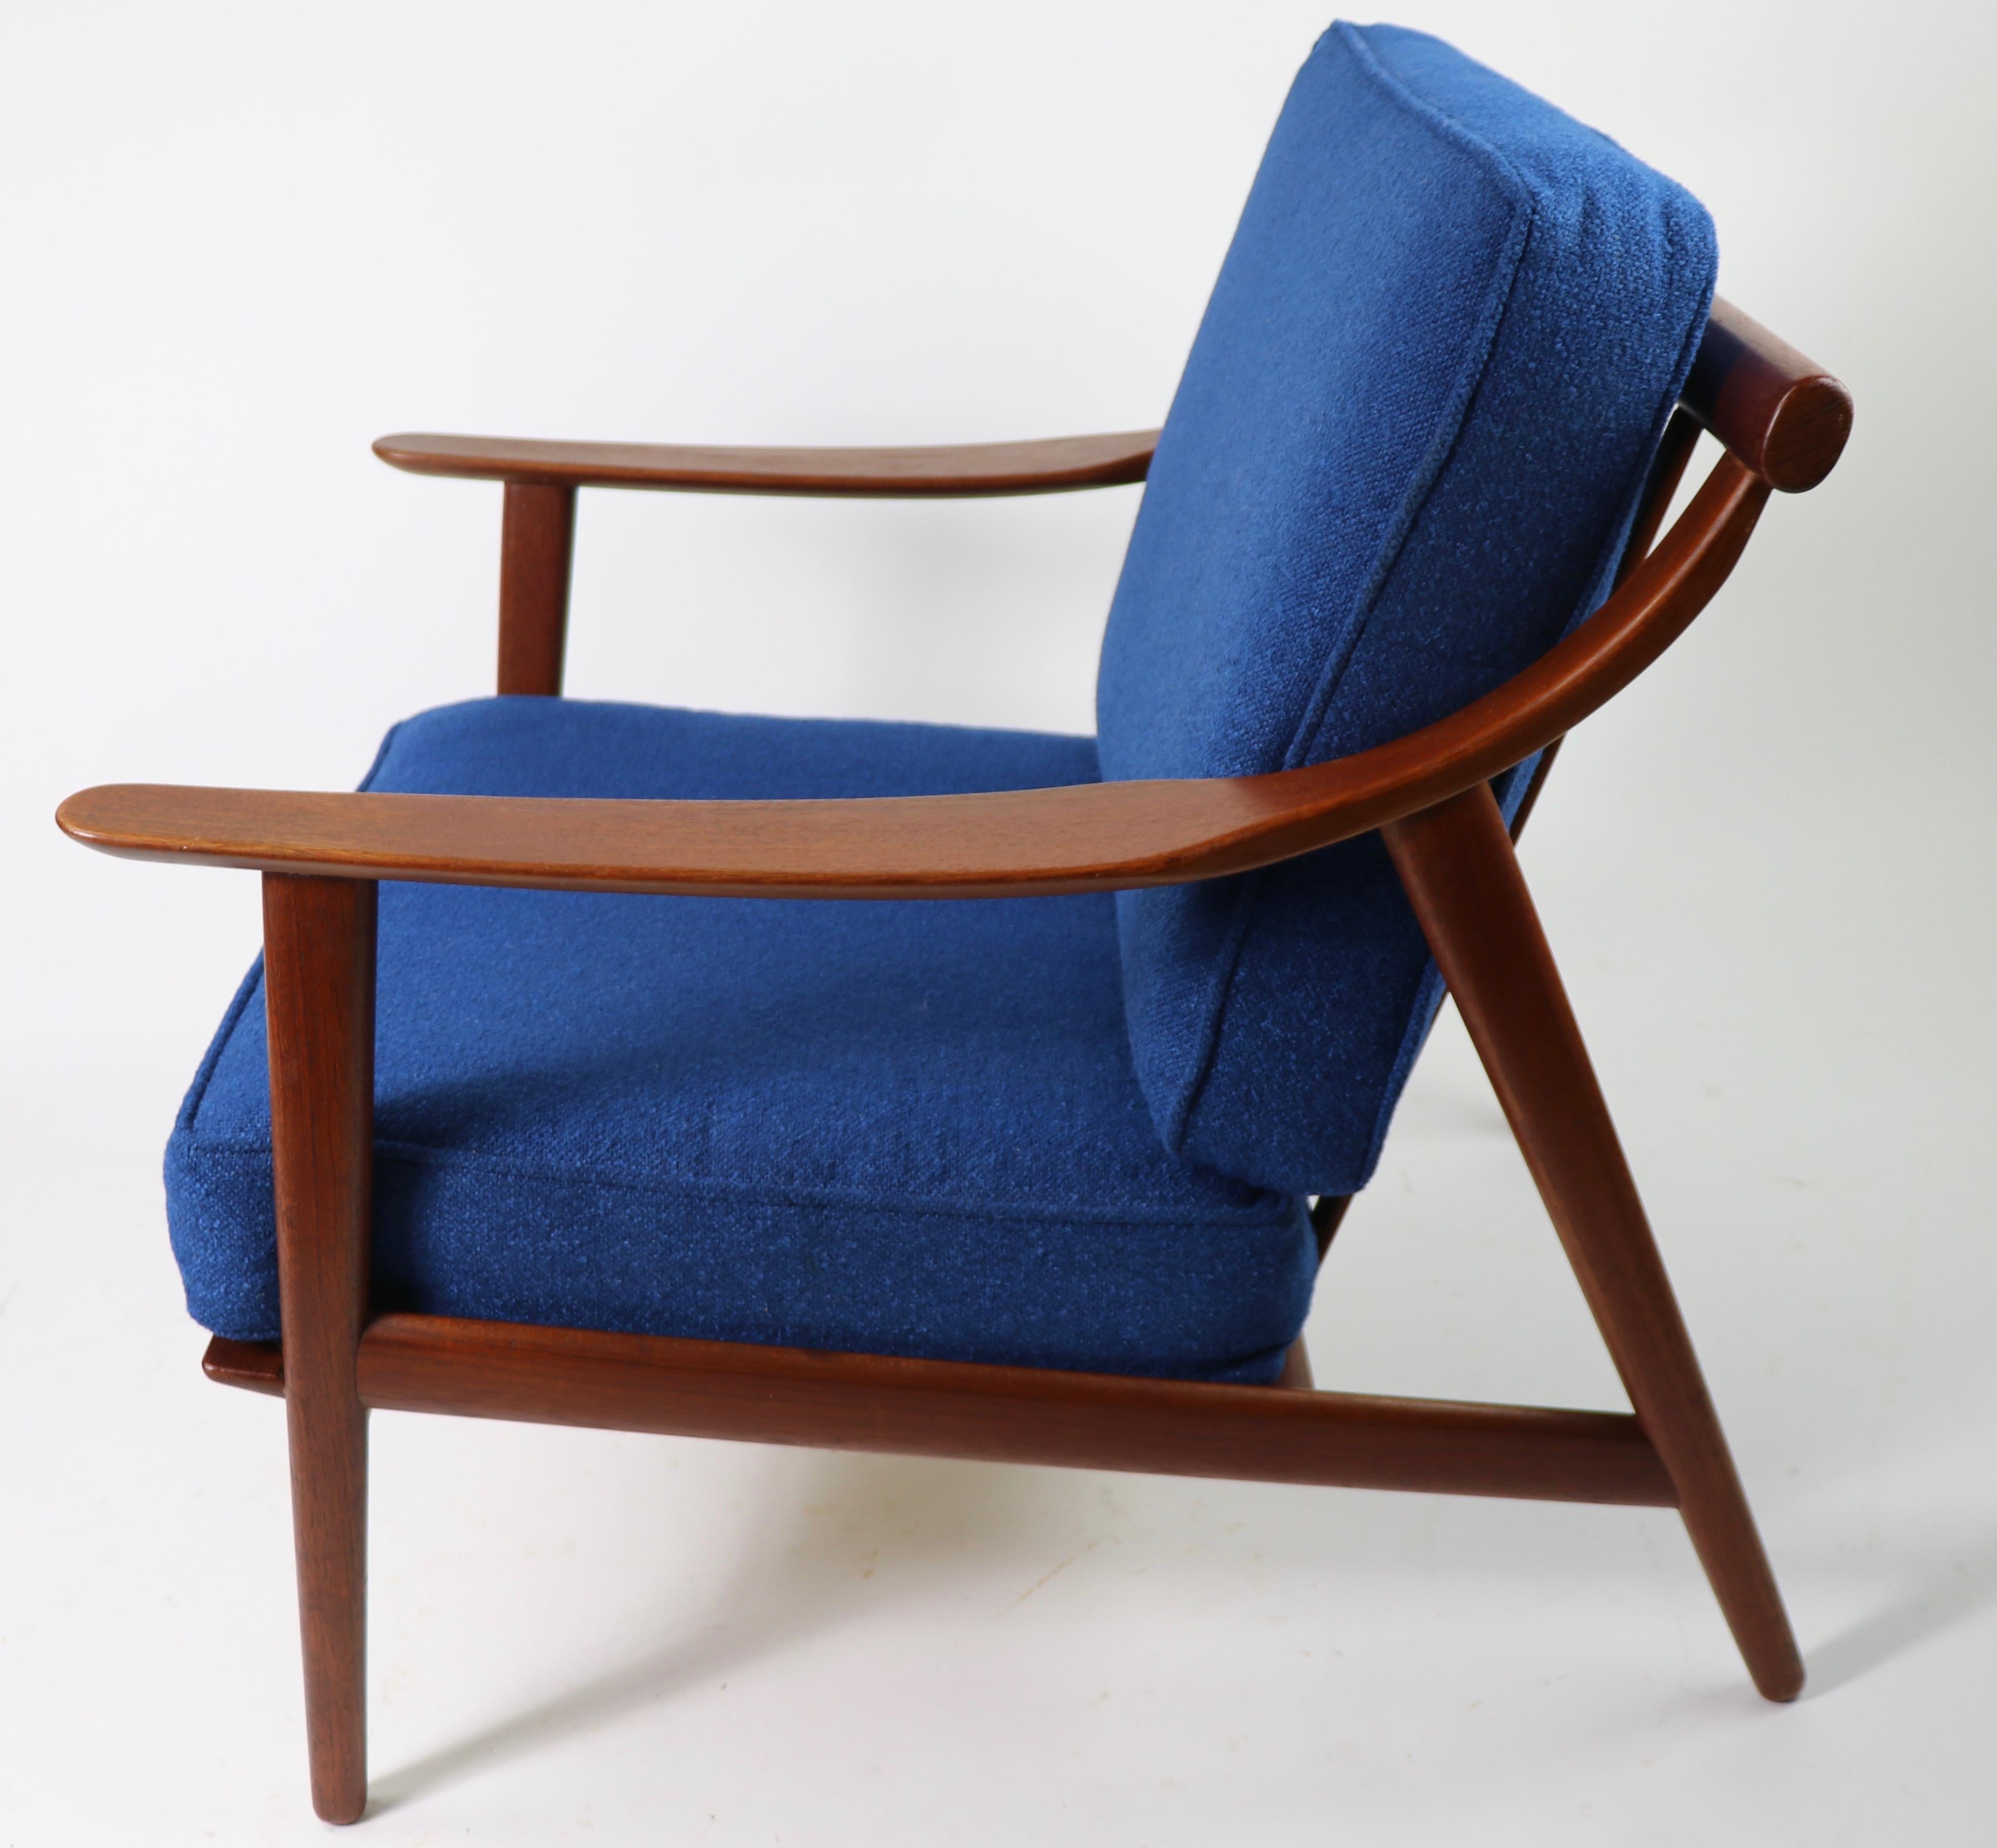 Danish modern teak frame lounge chair designed by Arne Hovmand Olsen for Mogerns Kold (model MK- 119). This example is in excellent, original condition (straps replaced). Sophisticated, architectural design, and clean ready to use.
Measures: Seat H